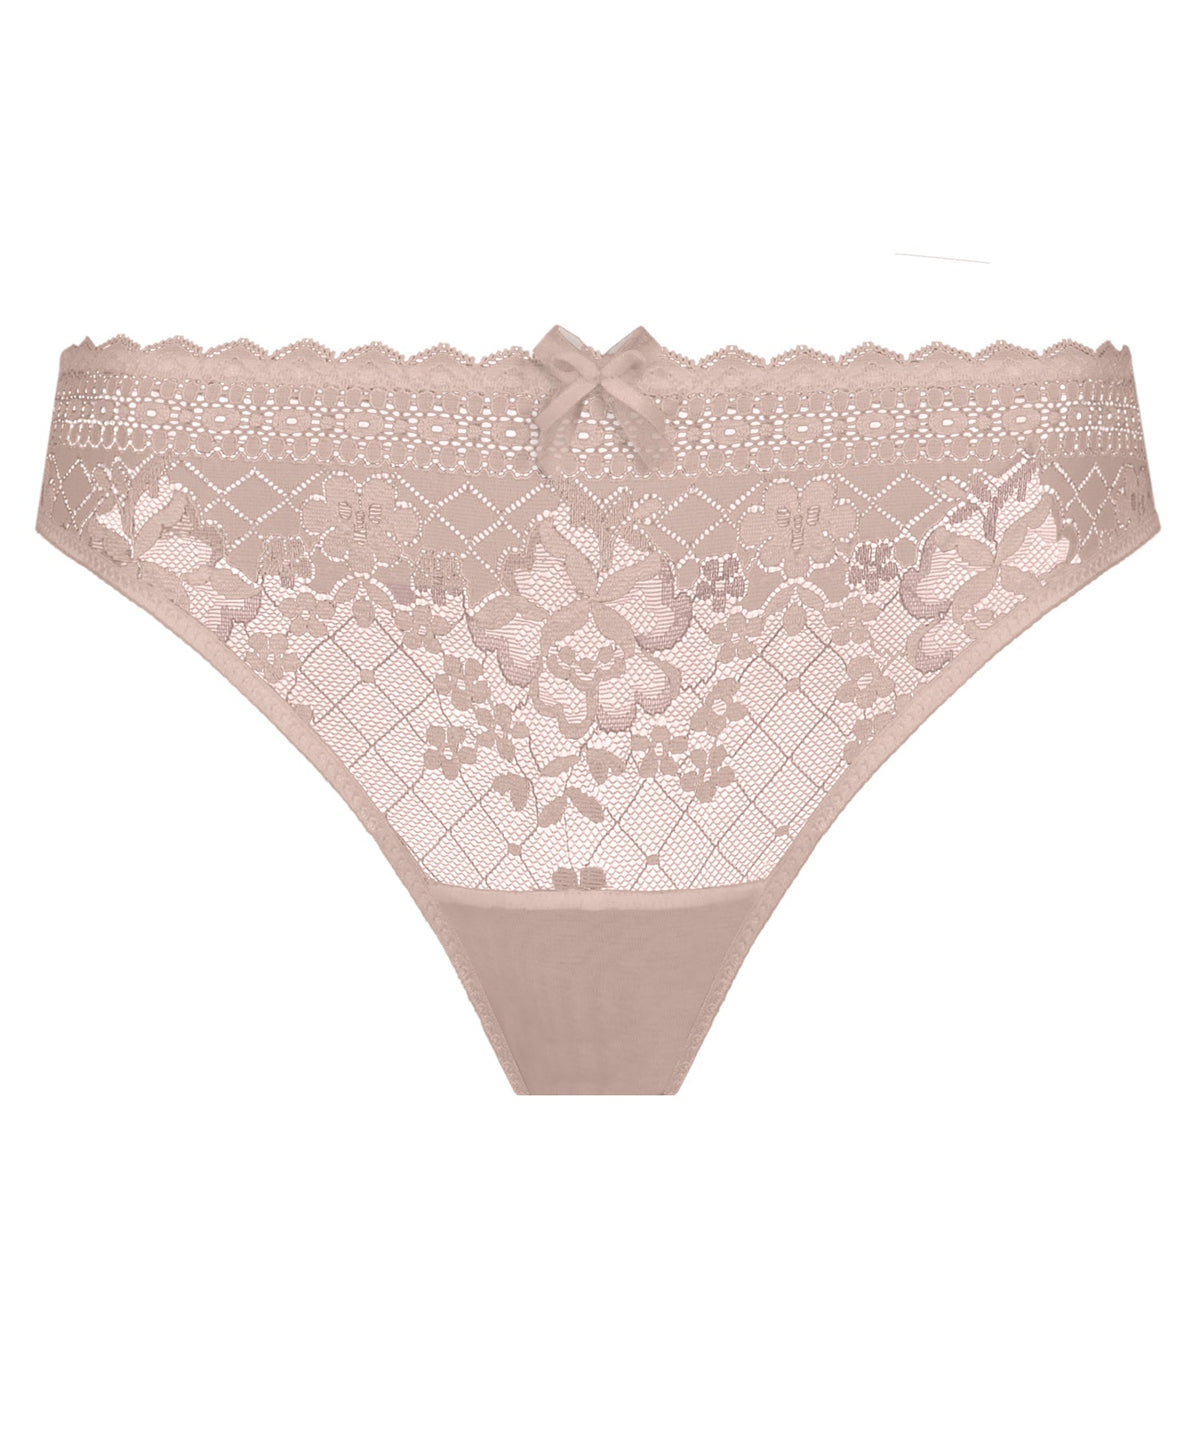 Melody Gold Brief